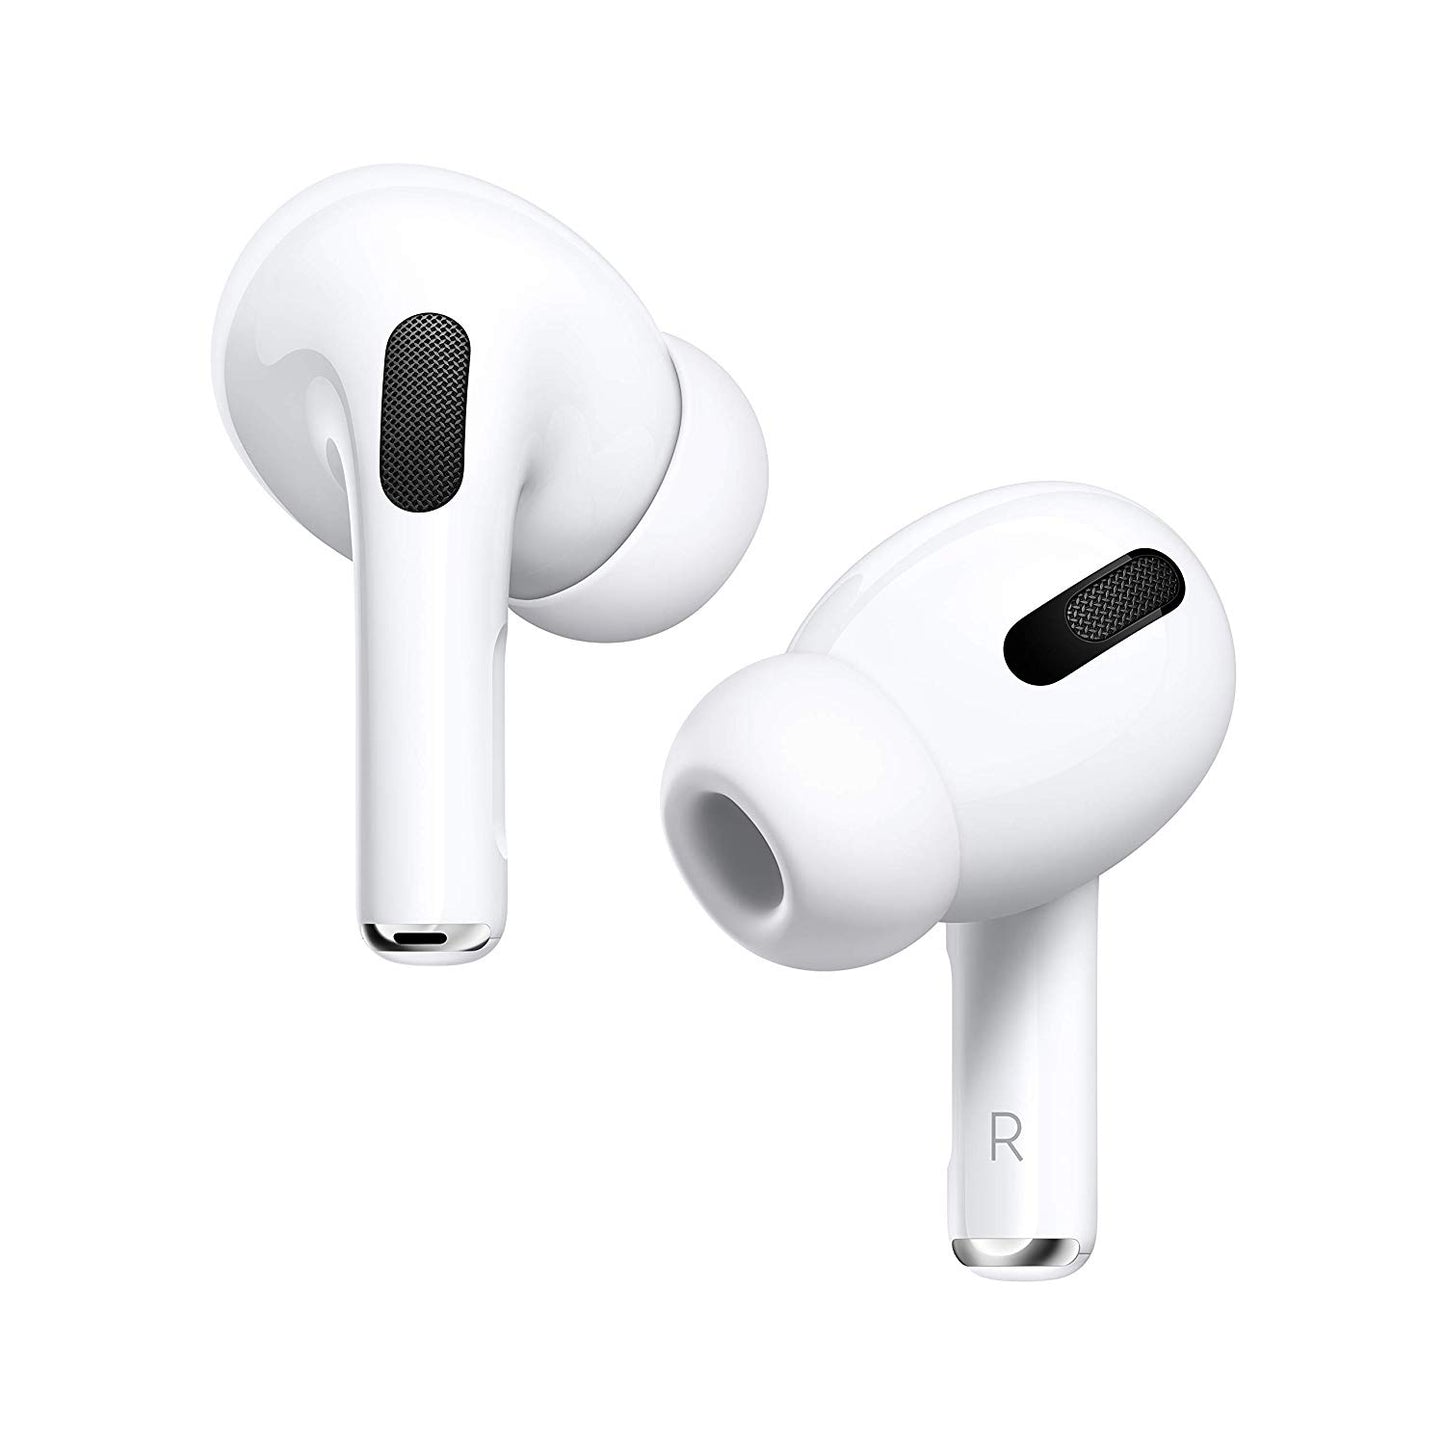 Apple AirPods Pro with Wireless Charging Case - 2019